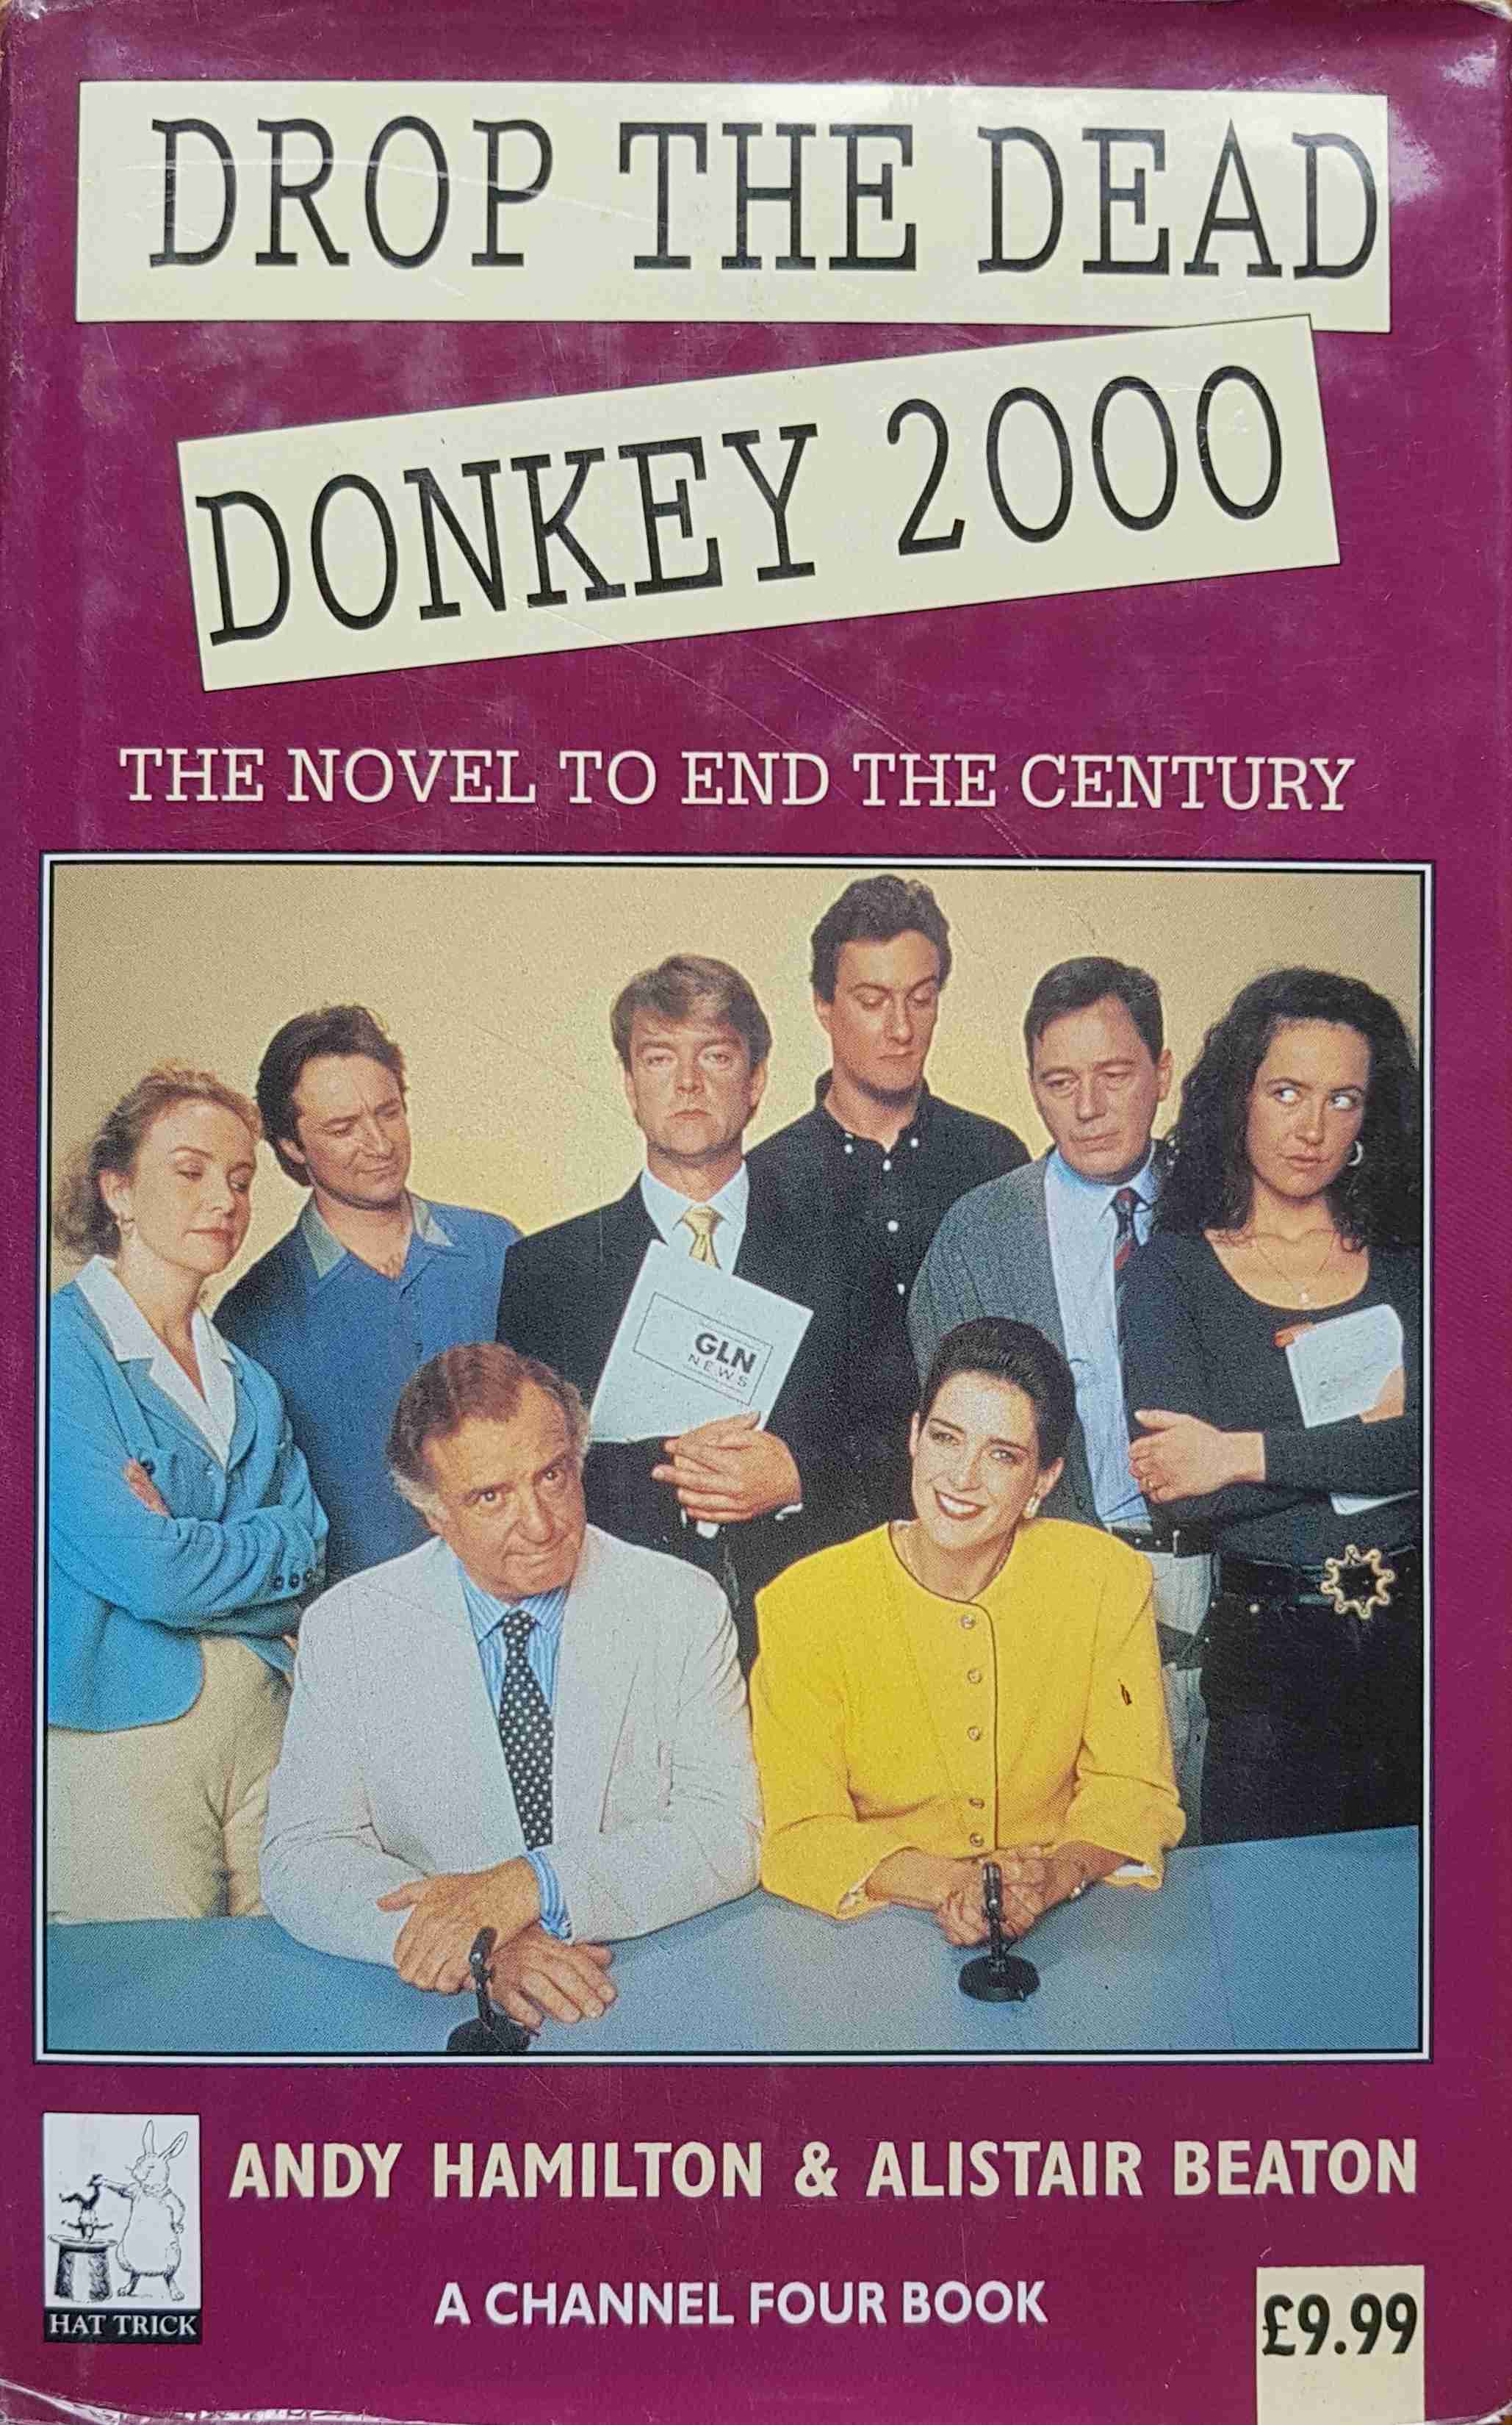 Picture of 0-316-91236-0 Drop the dead donkey by artist Andy Hamilton / Alistair Beaton from ITV, Channel 4 and Channel 5 library